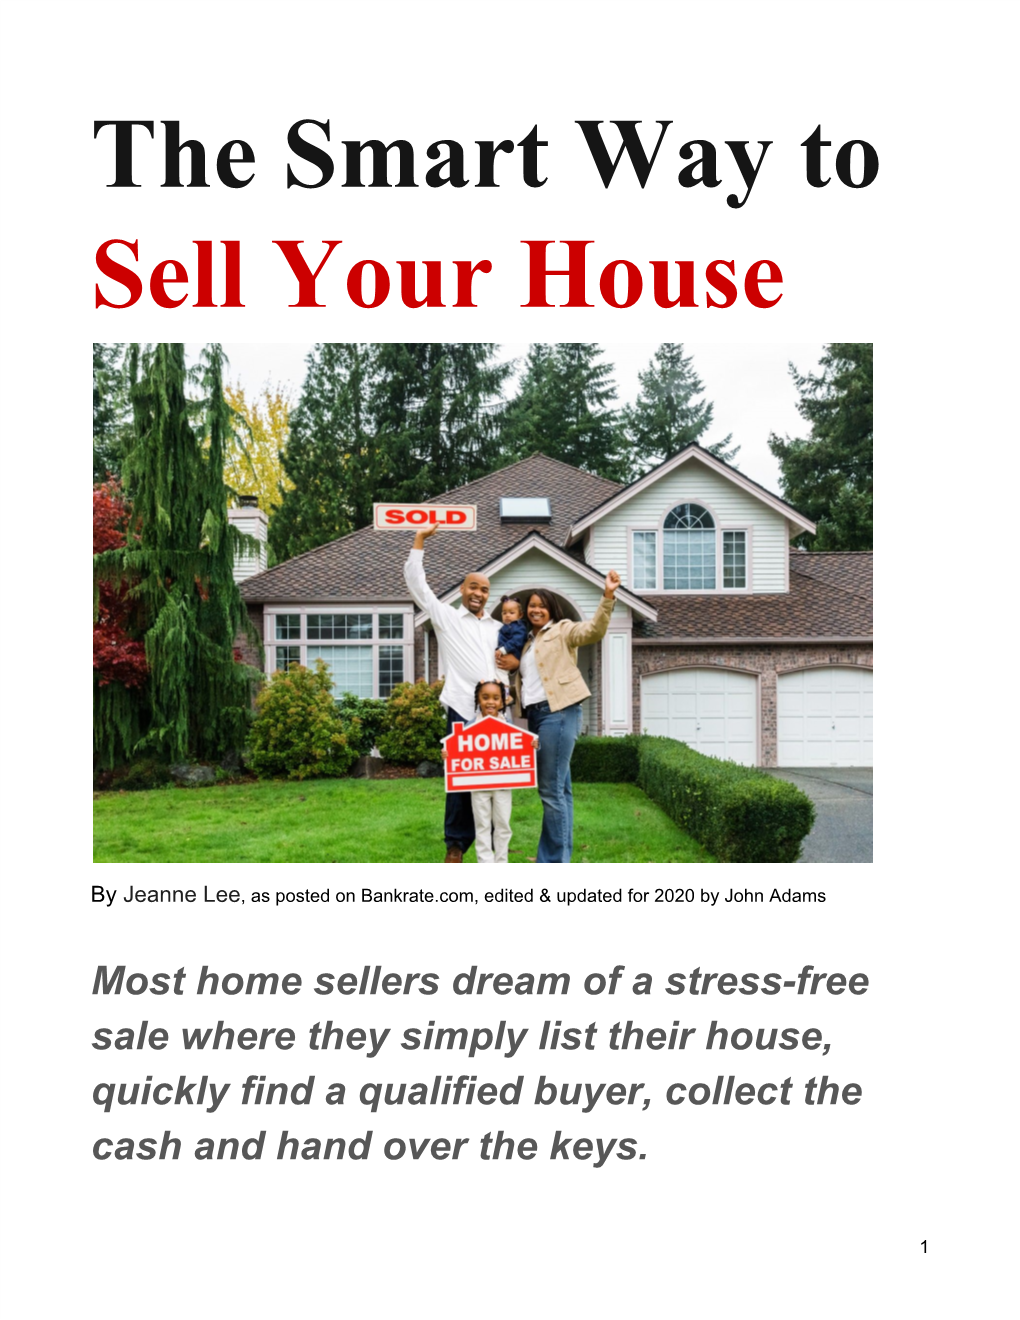 The Smart Way to Sell Your House